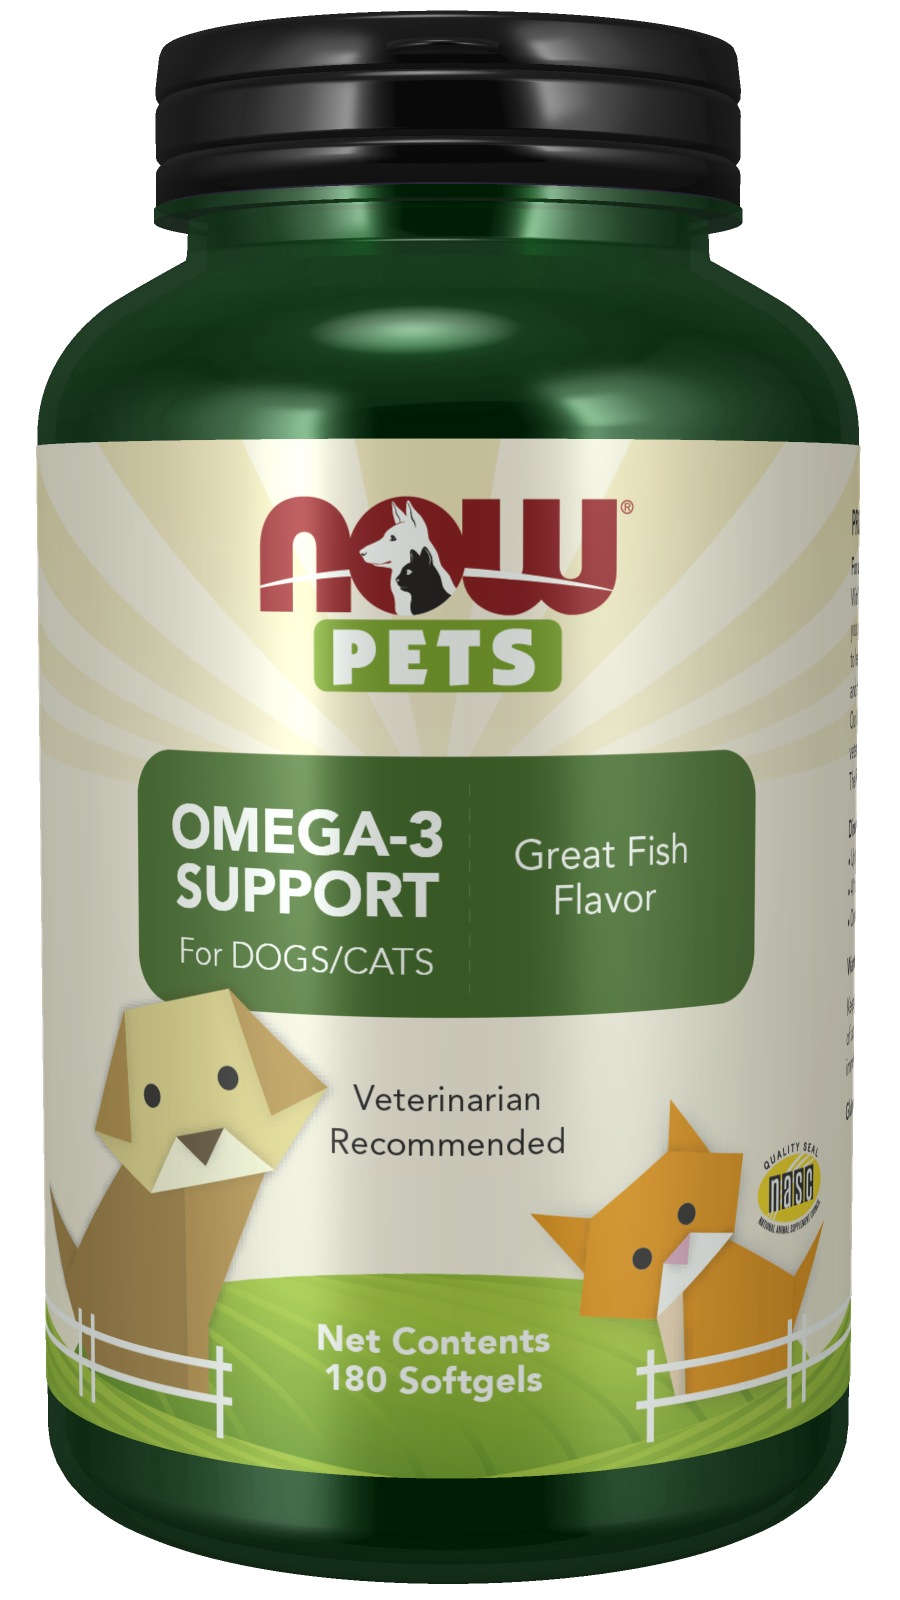 Pet Health of Dogs And Cats | Omega 3 Supplement | NOW Foods